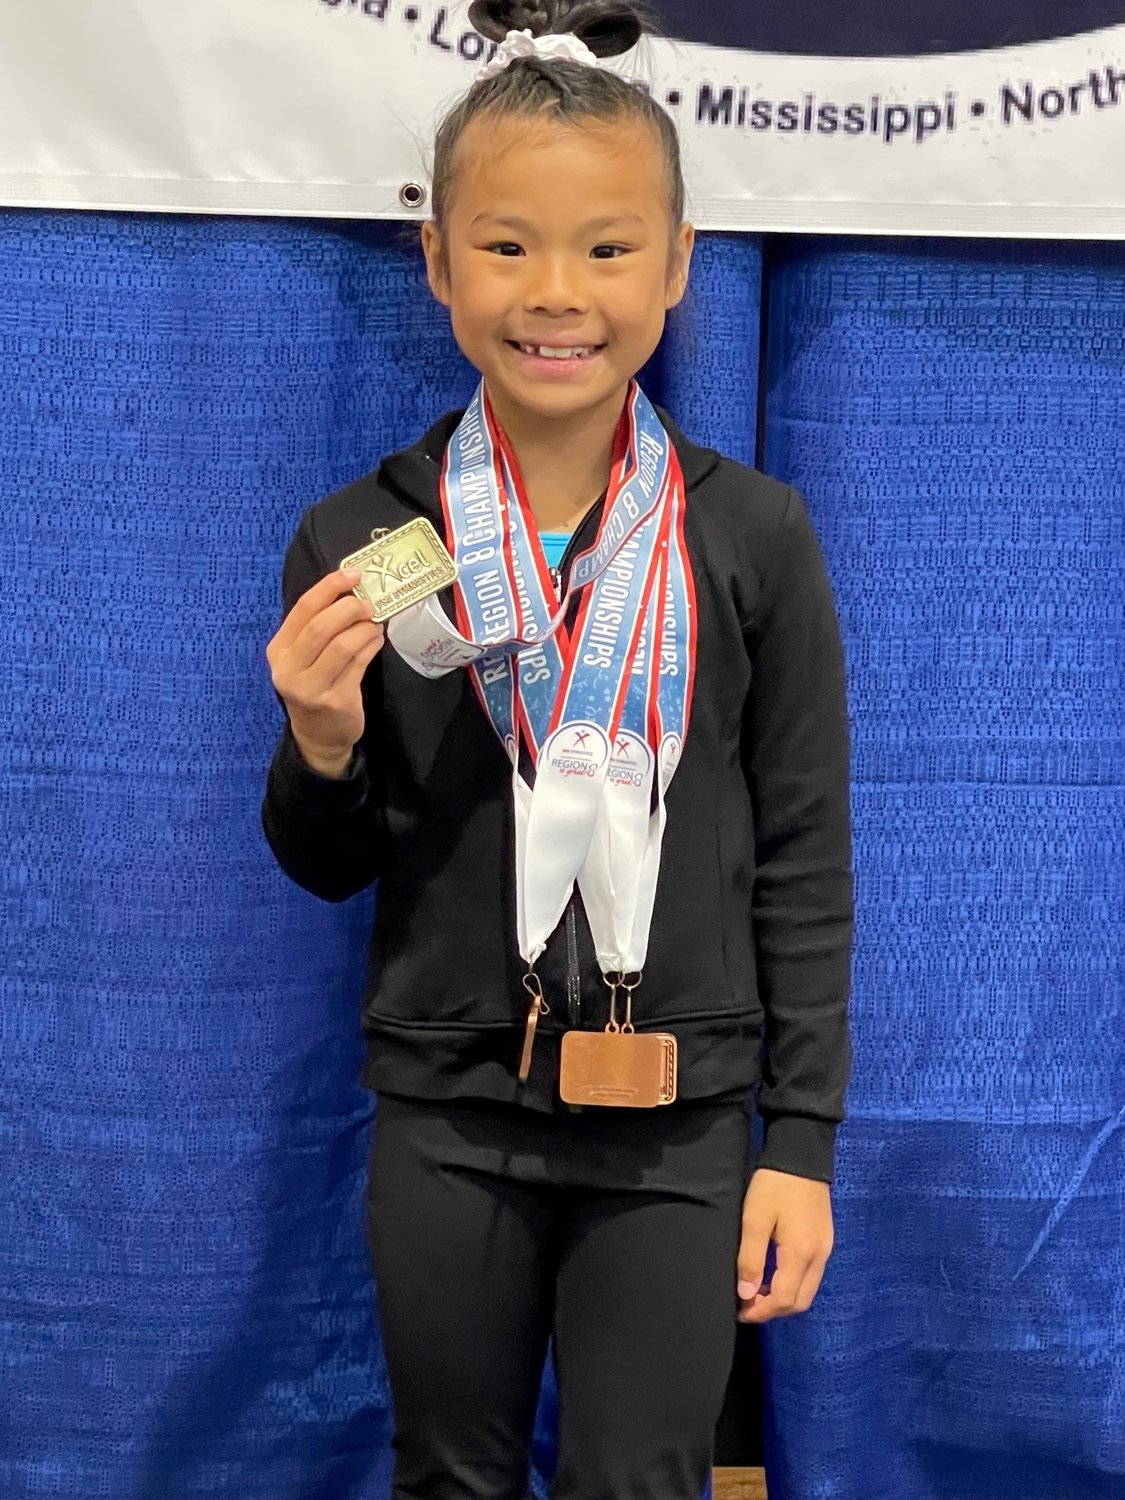 Rosie Roberds, age 8 of Fairhope trains at Eastern Shore Gymnastics Academy. She took home the gold for her floor routine and bronze medal on the balance beam as Xcel Platinum.